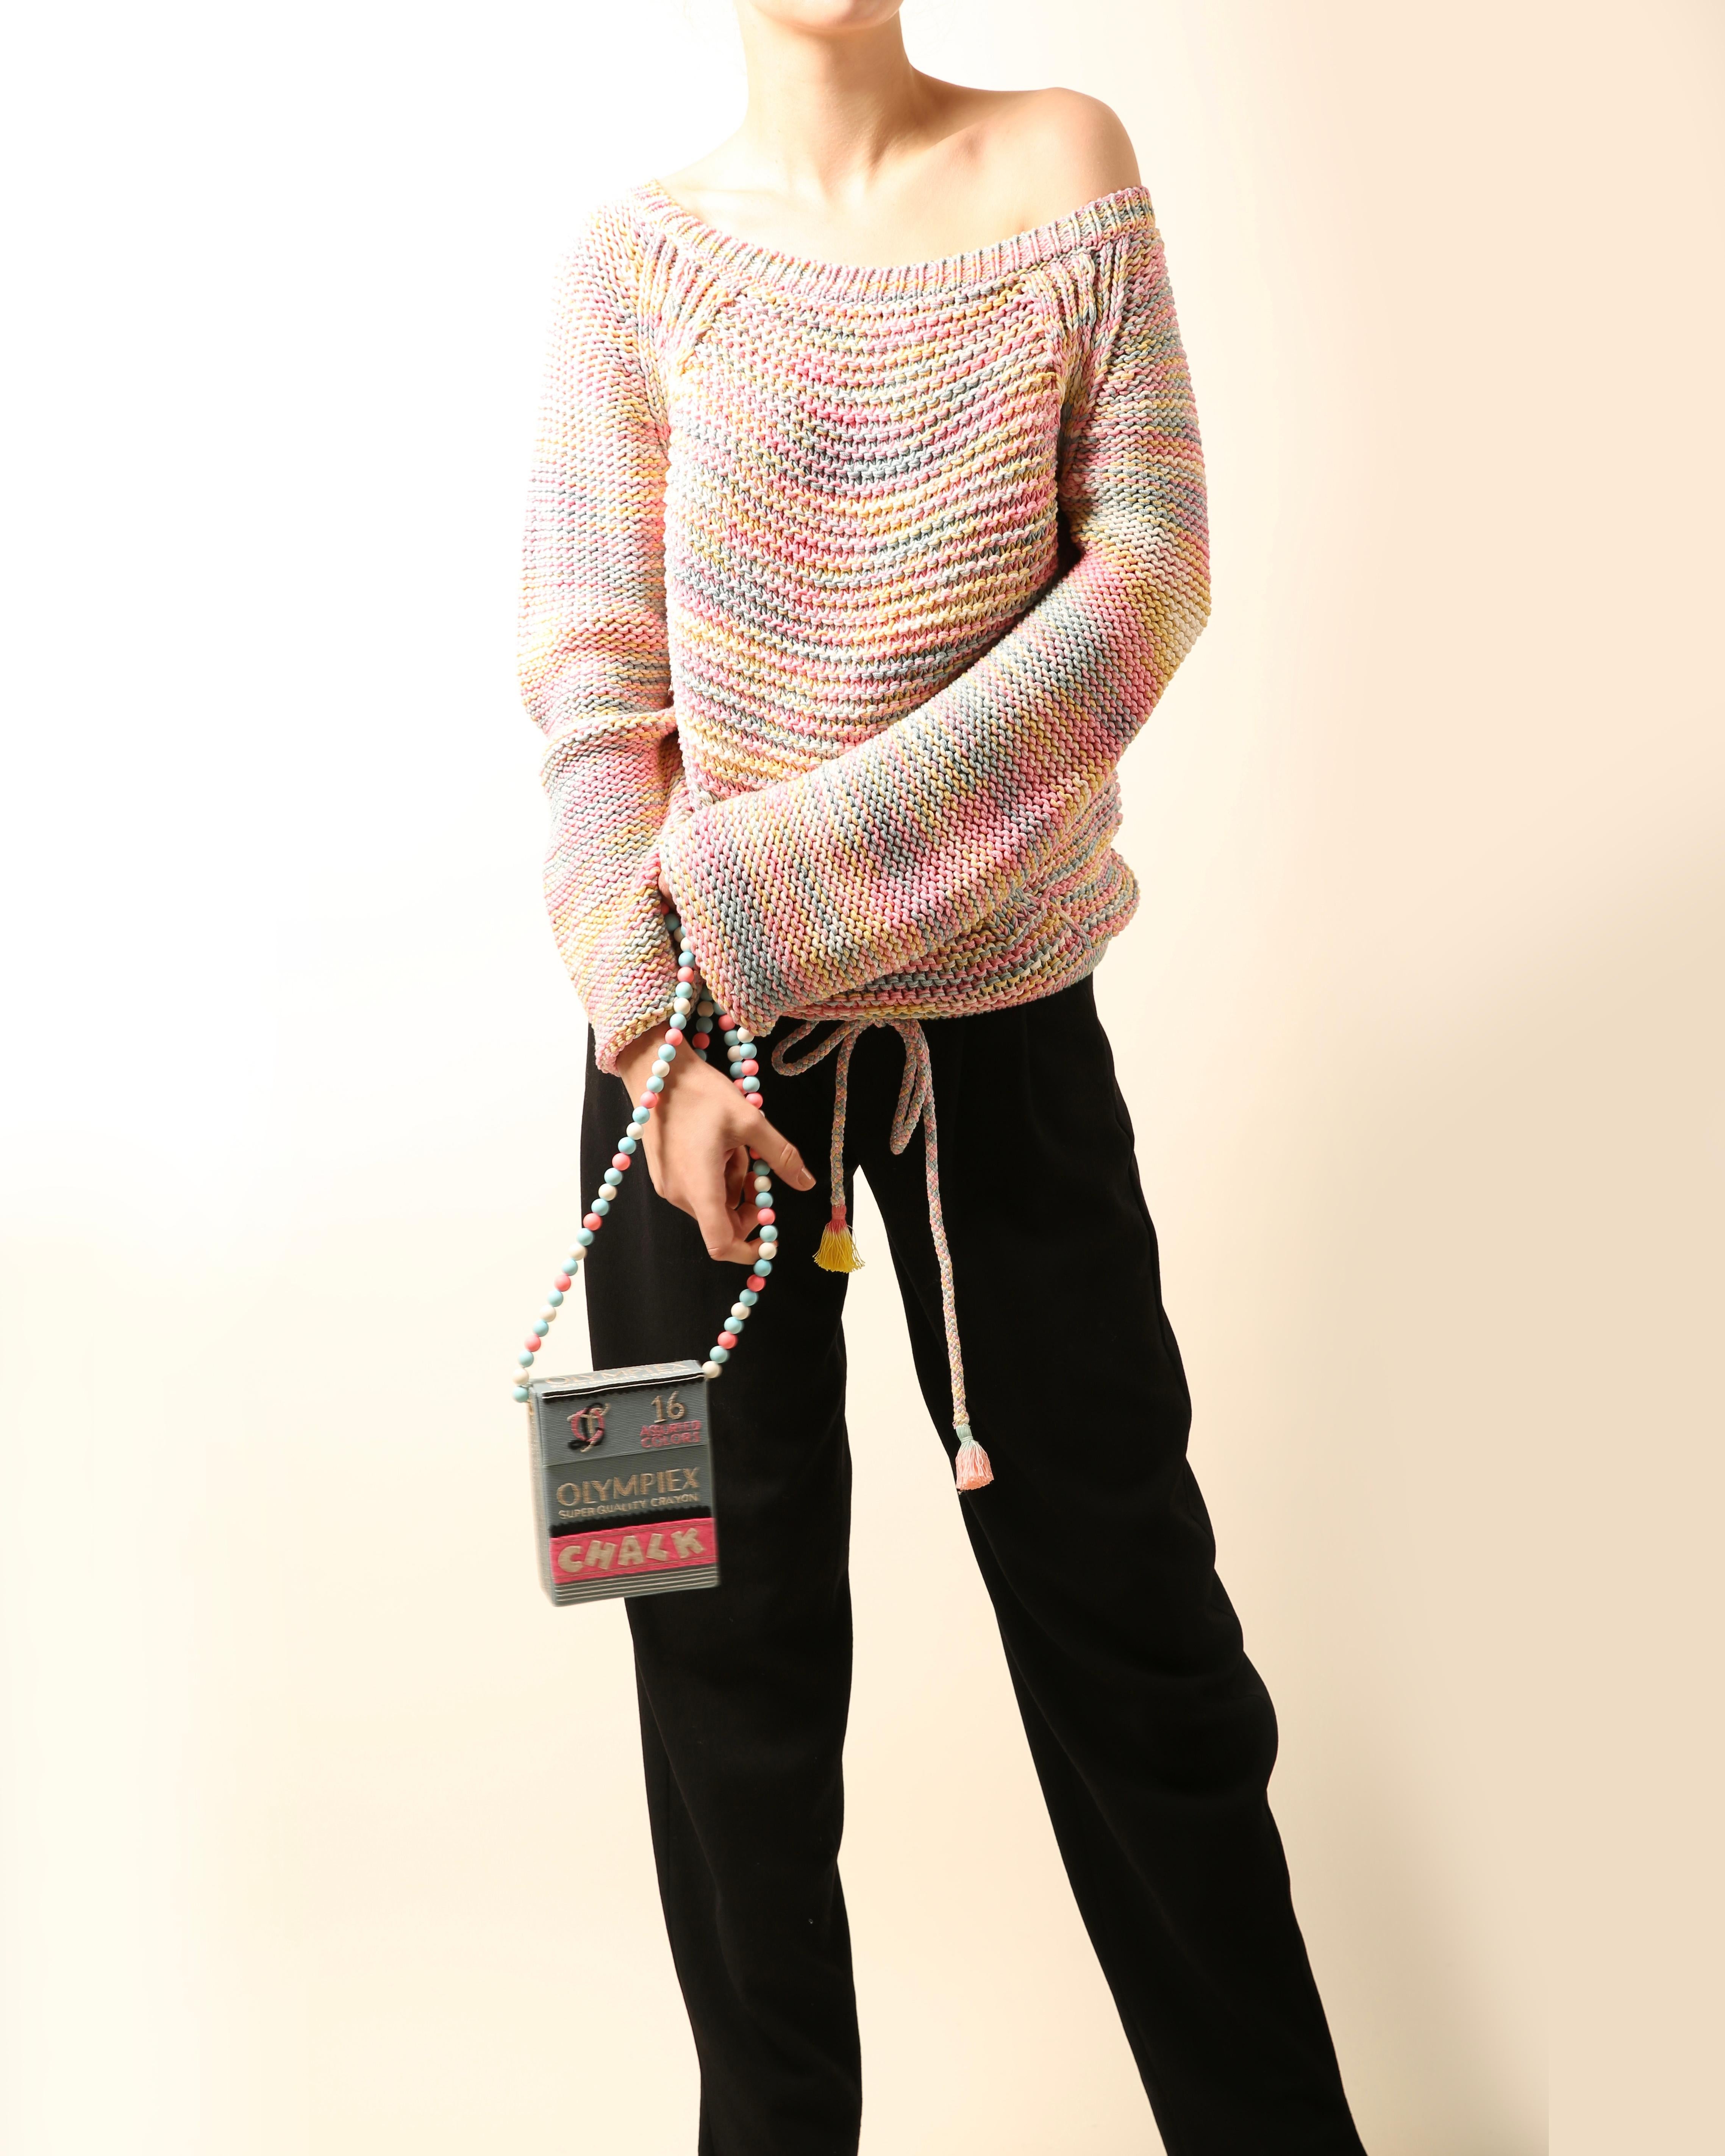 Women's Chloe S/S 2016 oversized chunky knit knitted pink pastel rainbow slouch sweater For Sale